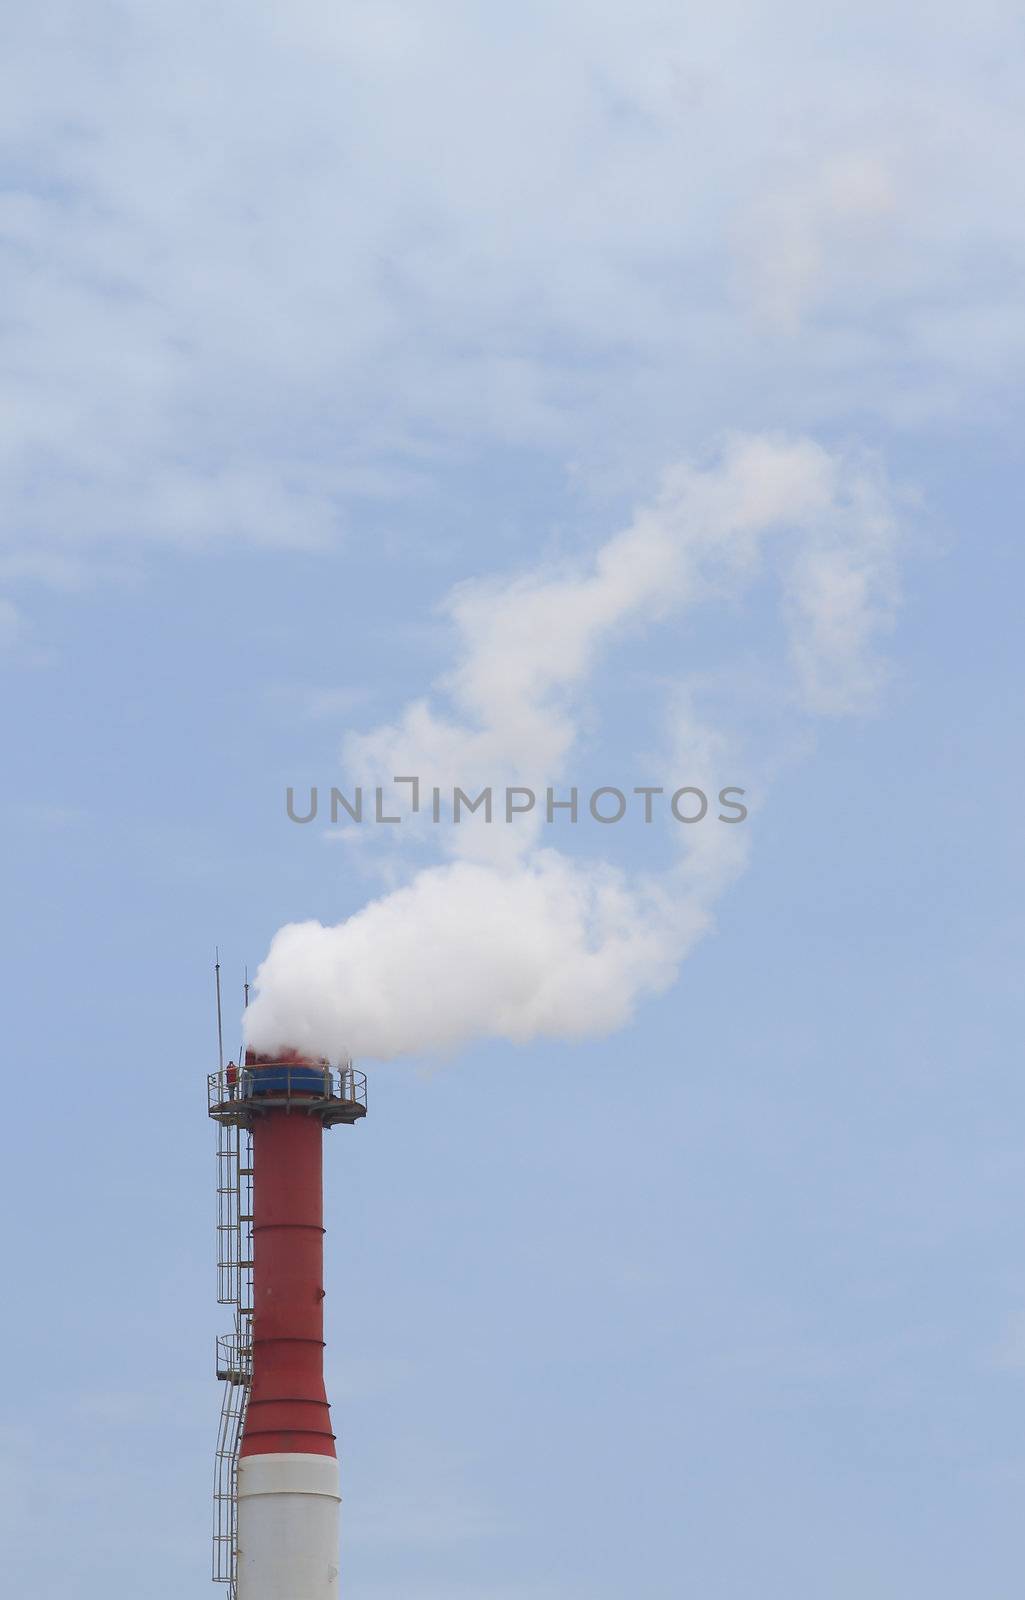 Plant pipe with smoke against blue sky